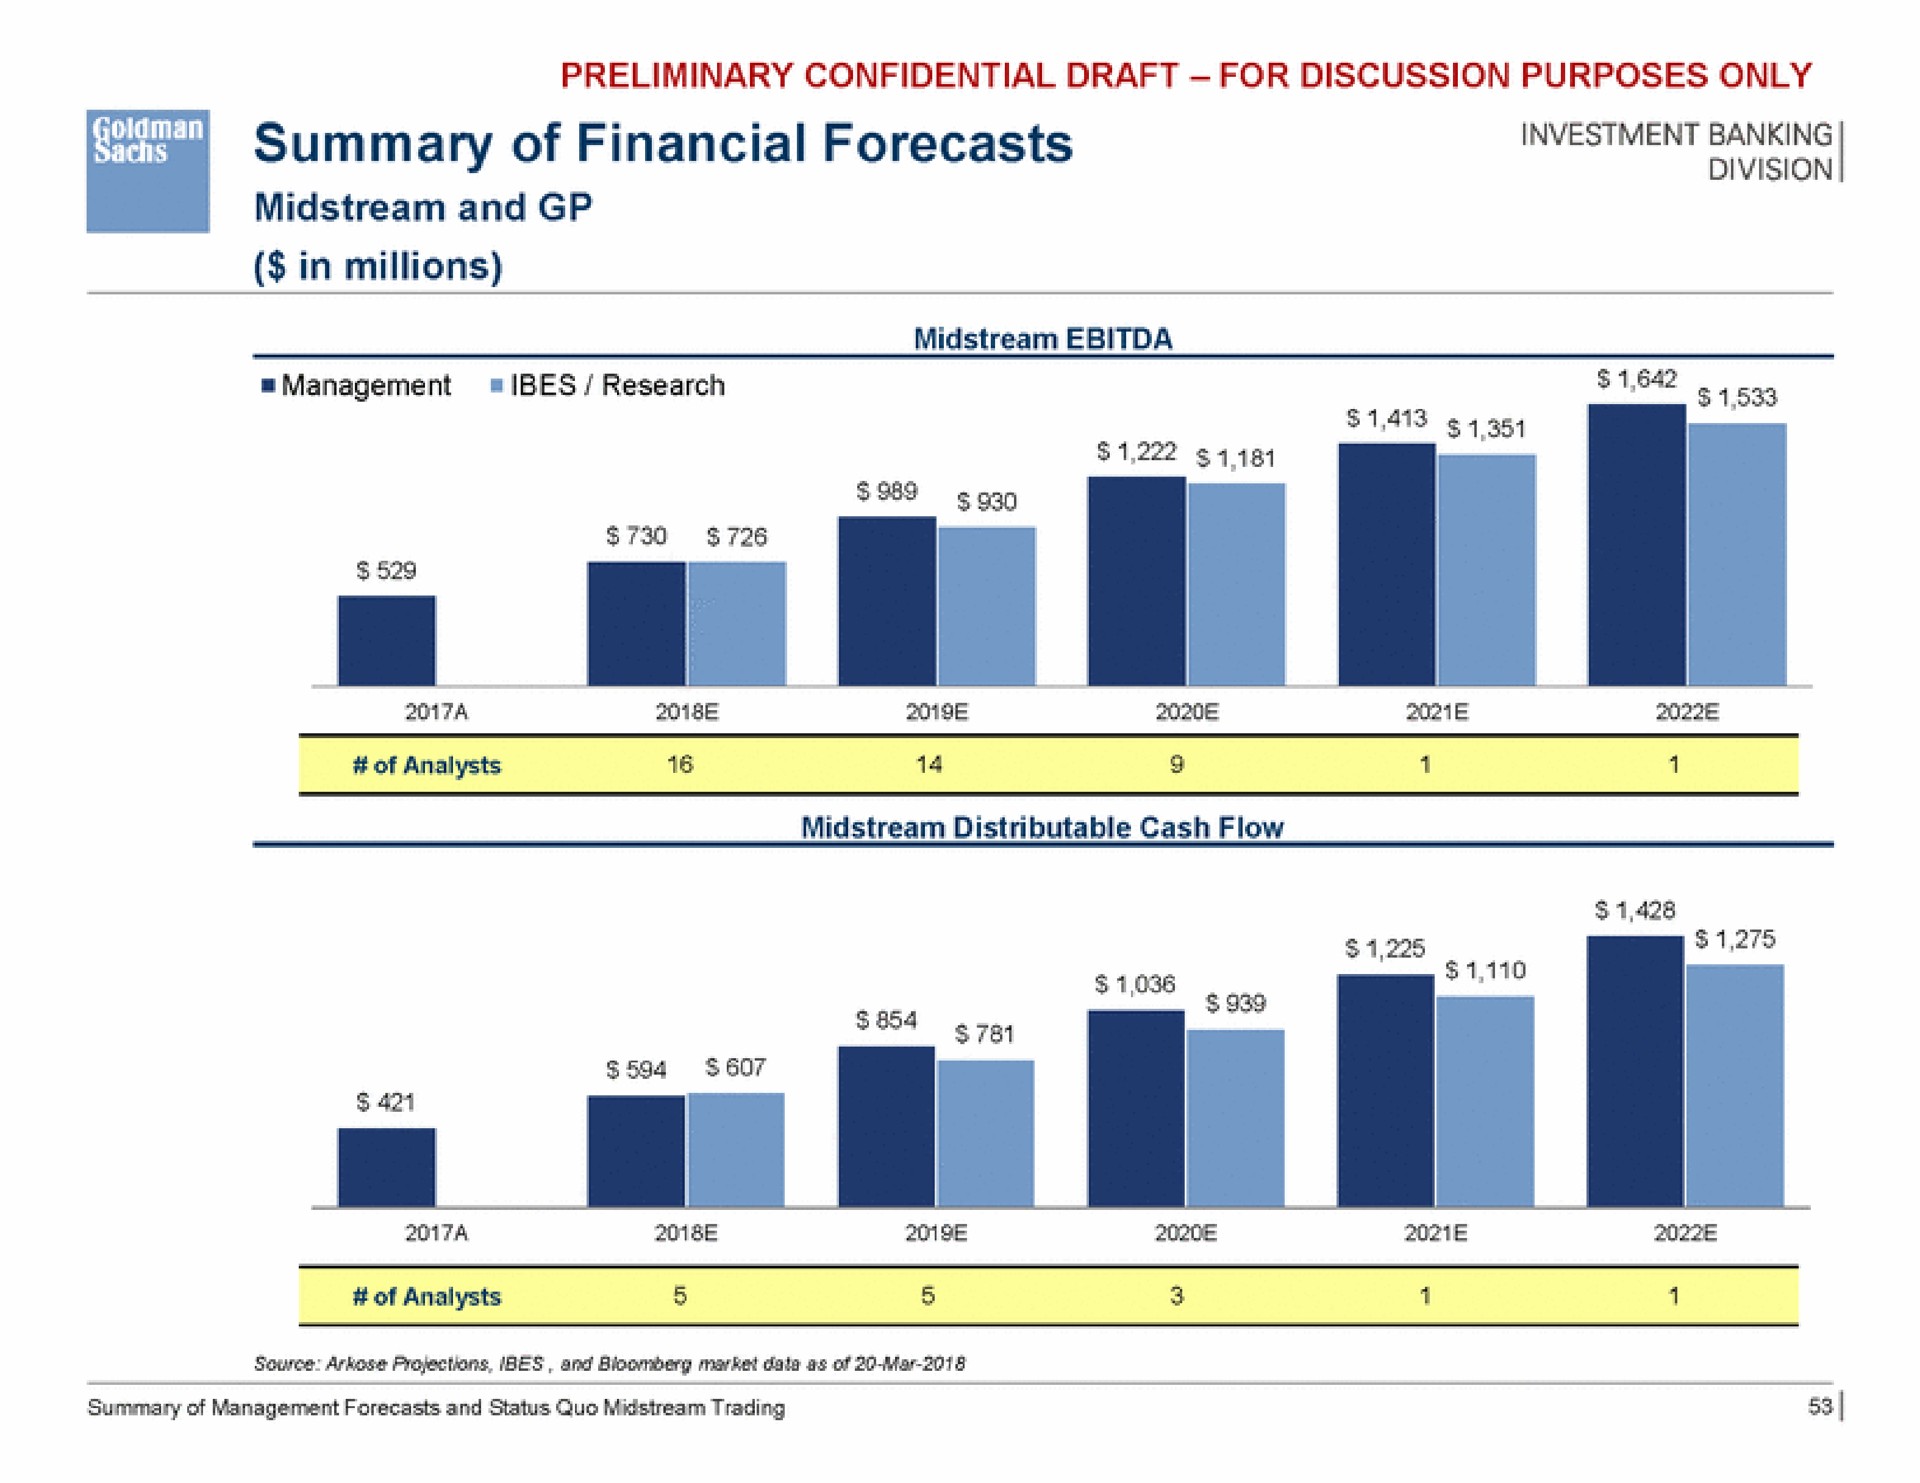 summary of financial forecasts investment banking | Goldman Sachs